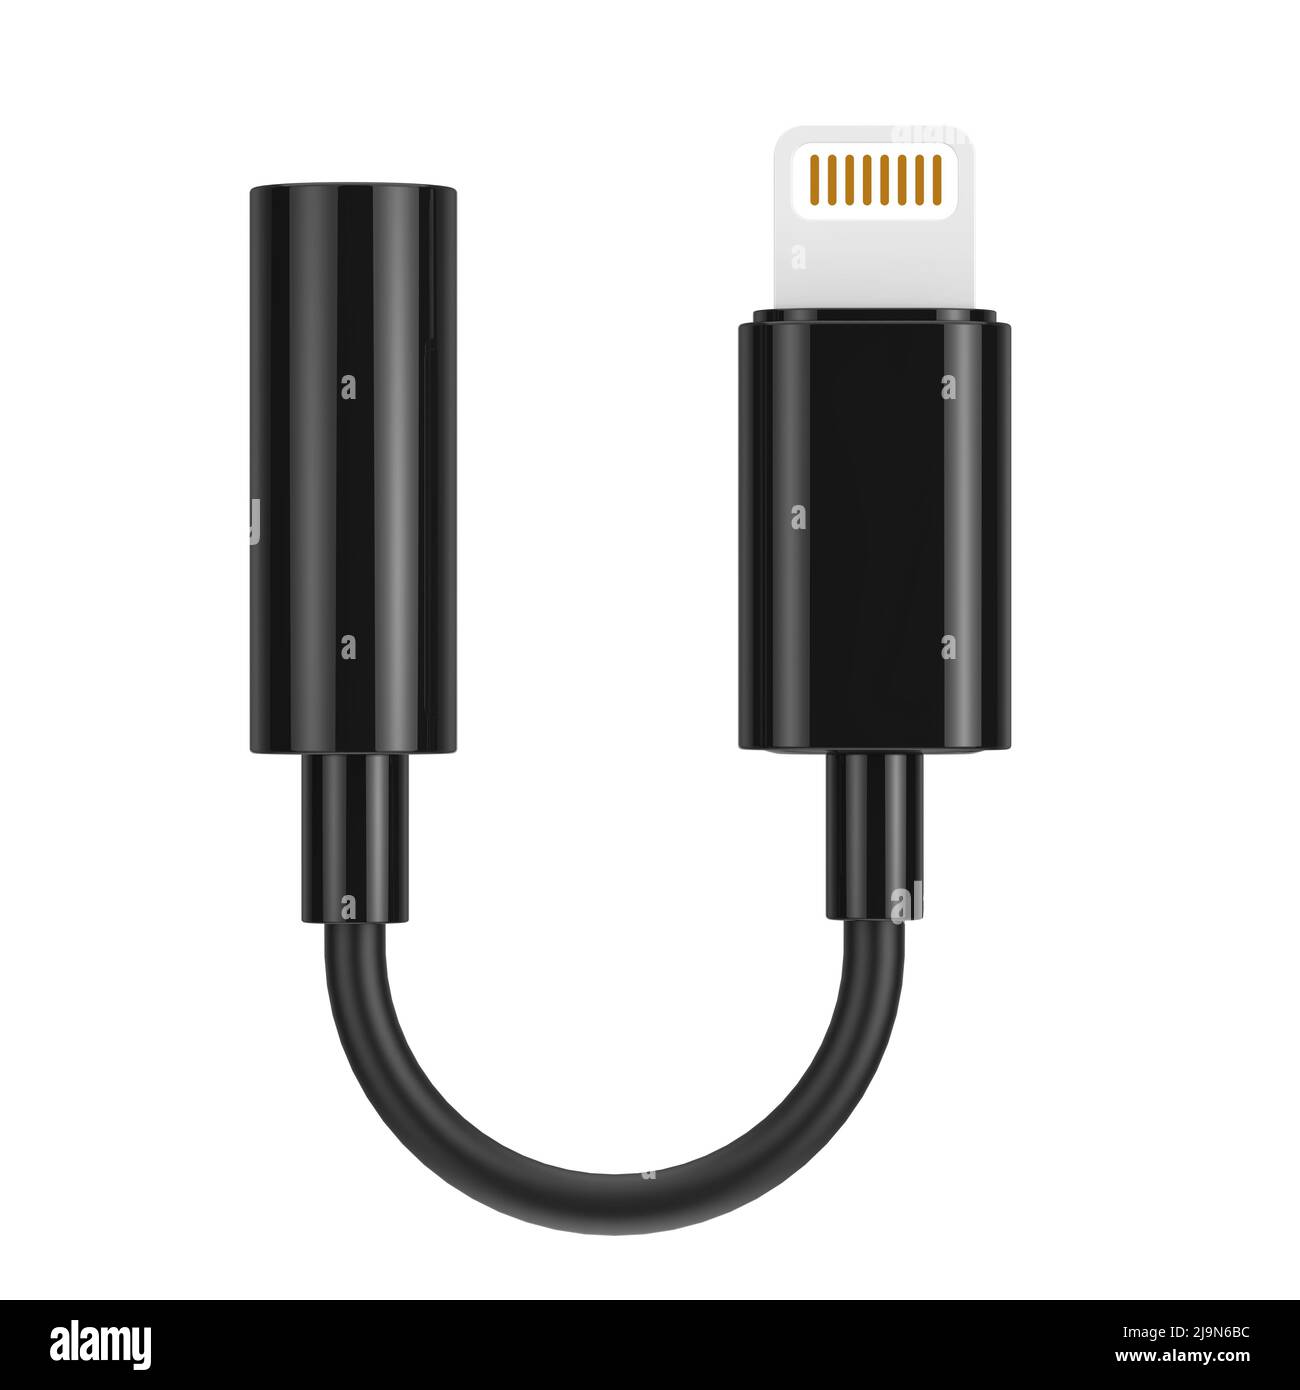 Black Lightning to Jack 3.5mm Headphone Adapter Cable on a white background. 3d Rendering Stock Photo